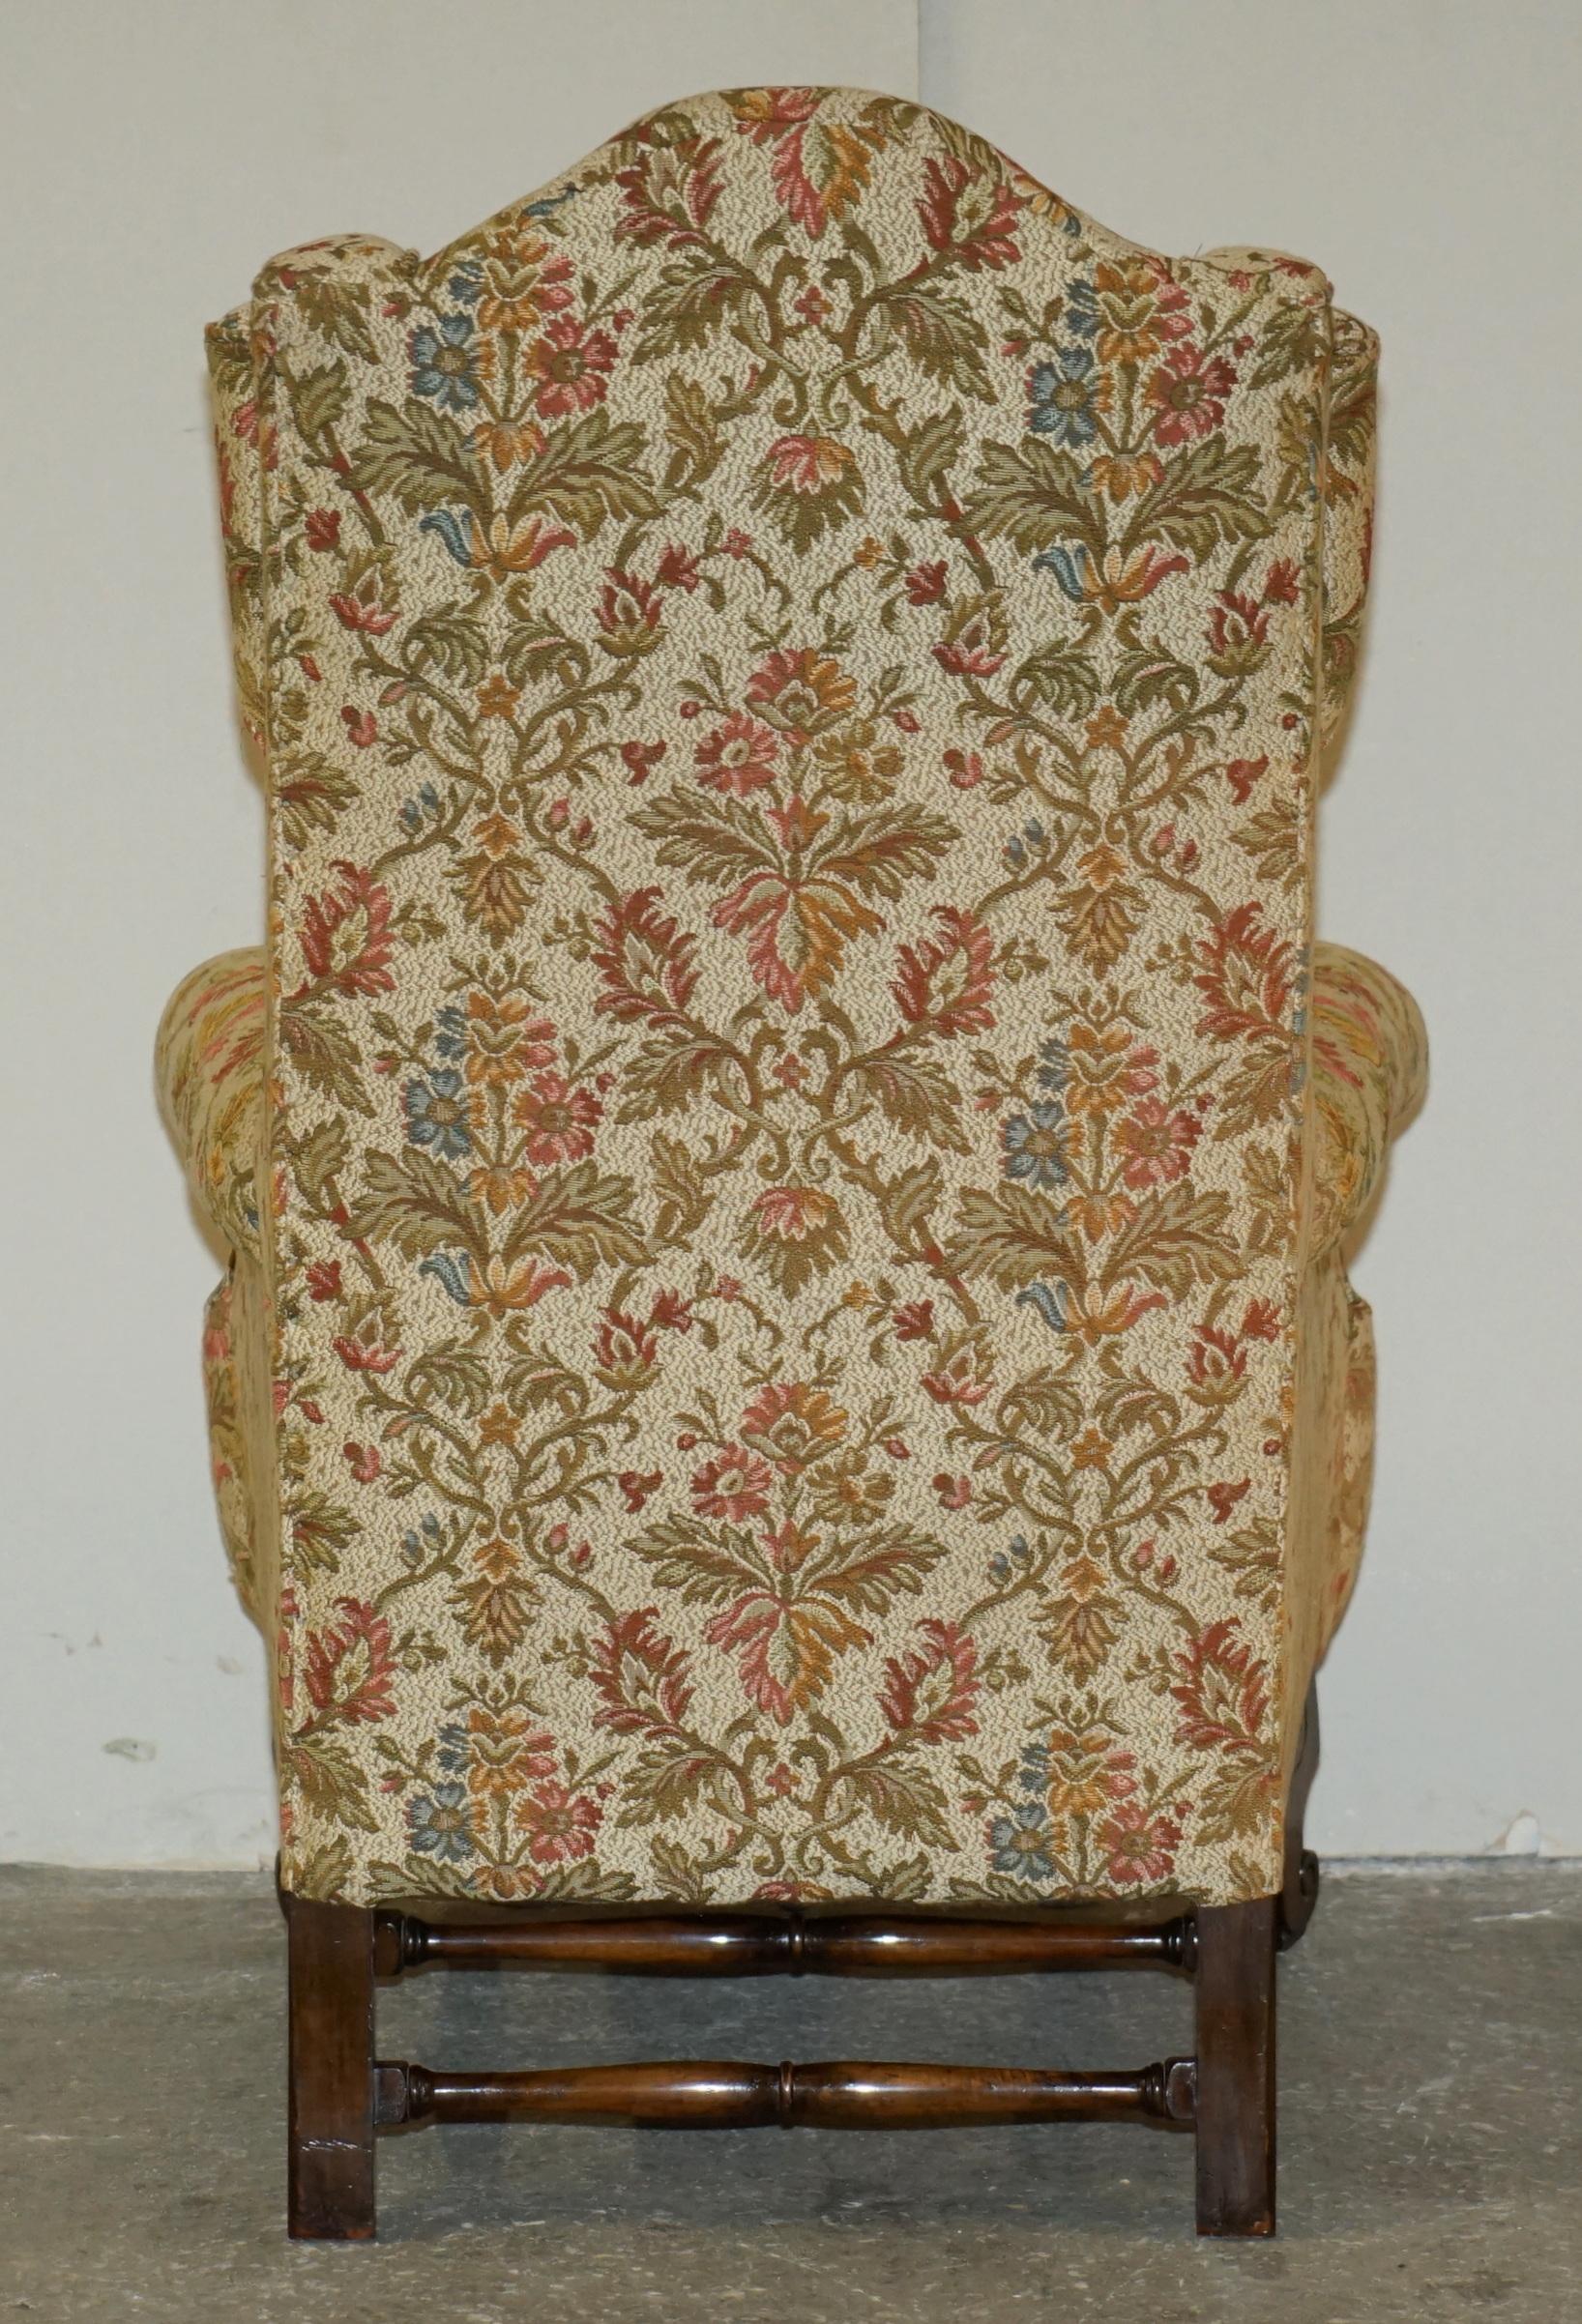 PAIR OF ANTIQUE ITALIAN CAROLEAN HIGH BACK WiNGBACK ARMCHAIRS FOR UPHOLSTERY For Sale 6